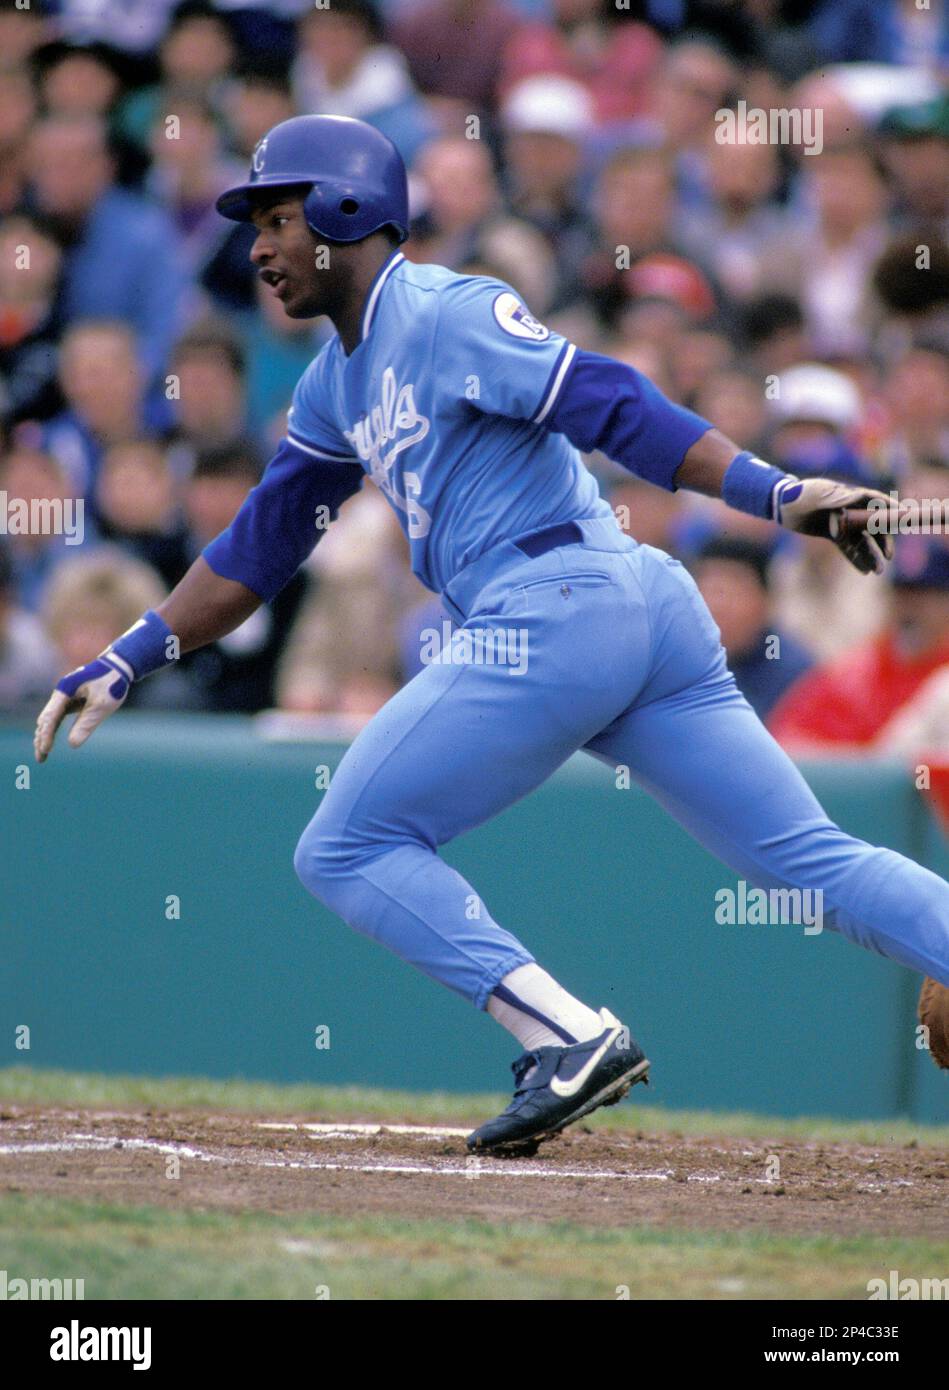 Bo Jackson competing for the Kansas City Royals in 1989 Stock Photo - Alamy